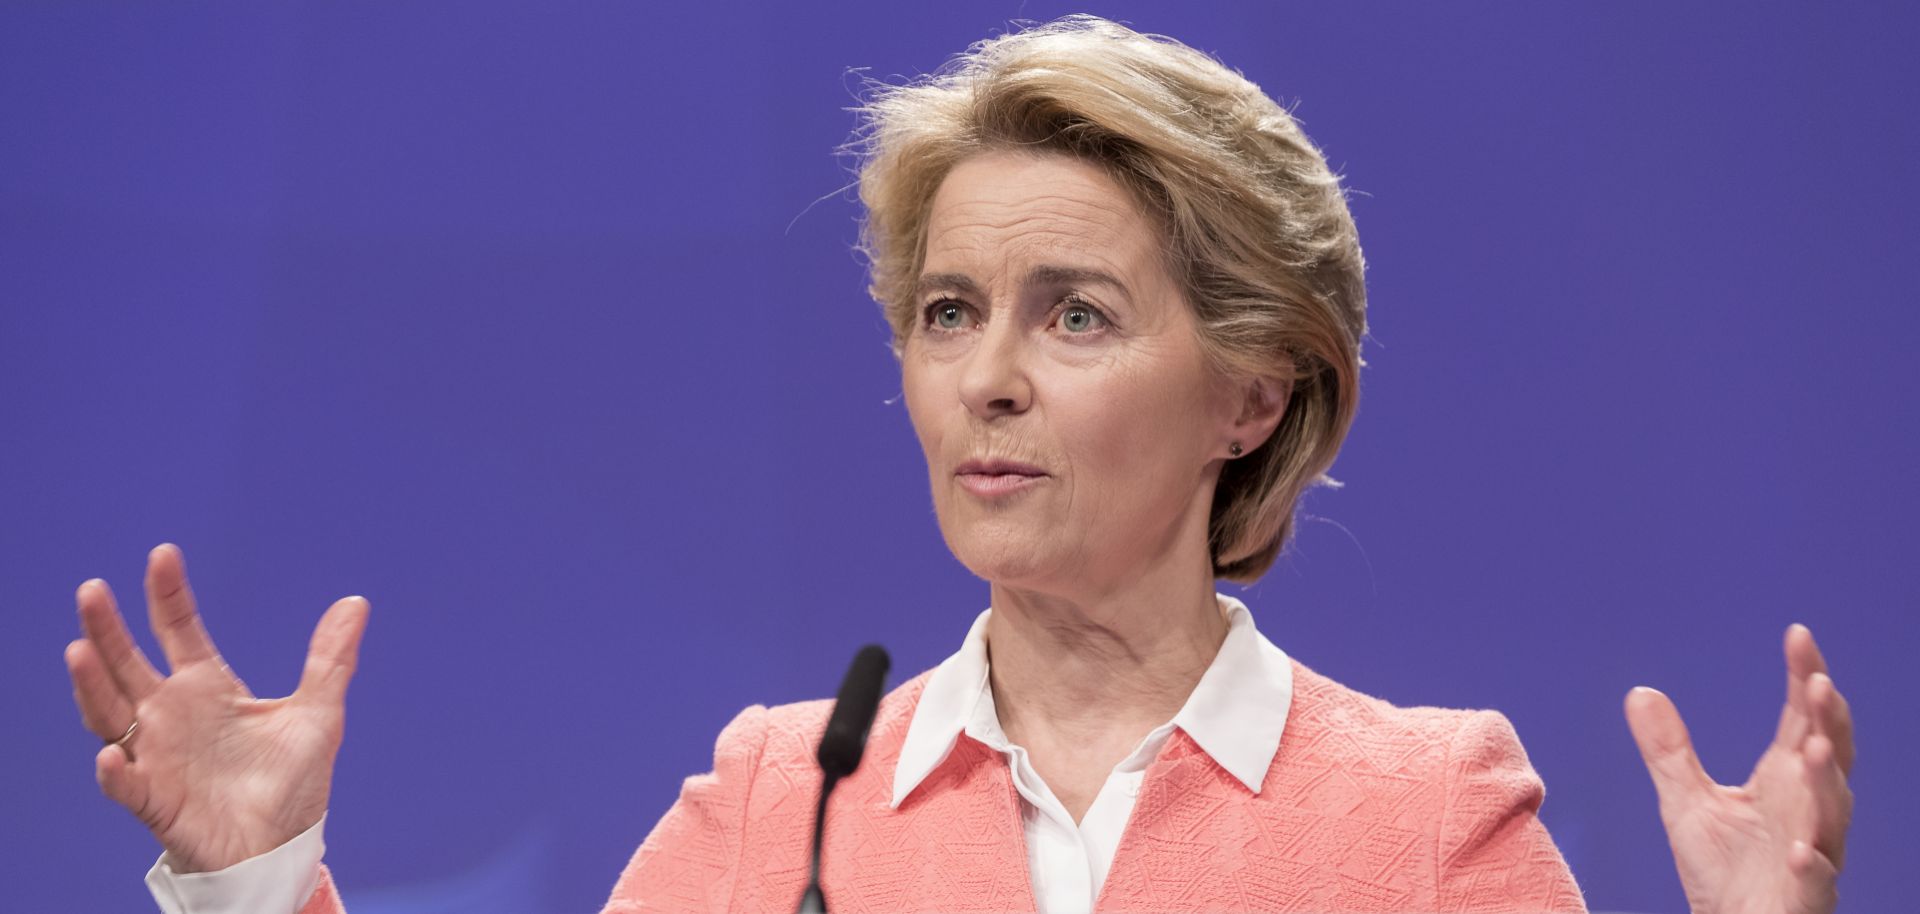 European Commission President-elect Ursula von der Leyen unveils a list of appointees to the European Union's executive branch in Brussels on Sept. 10, 2019.